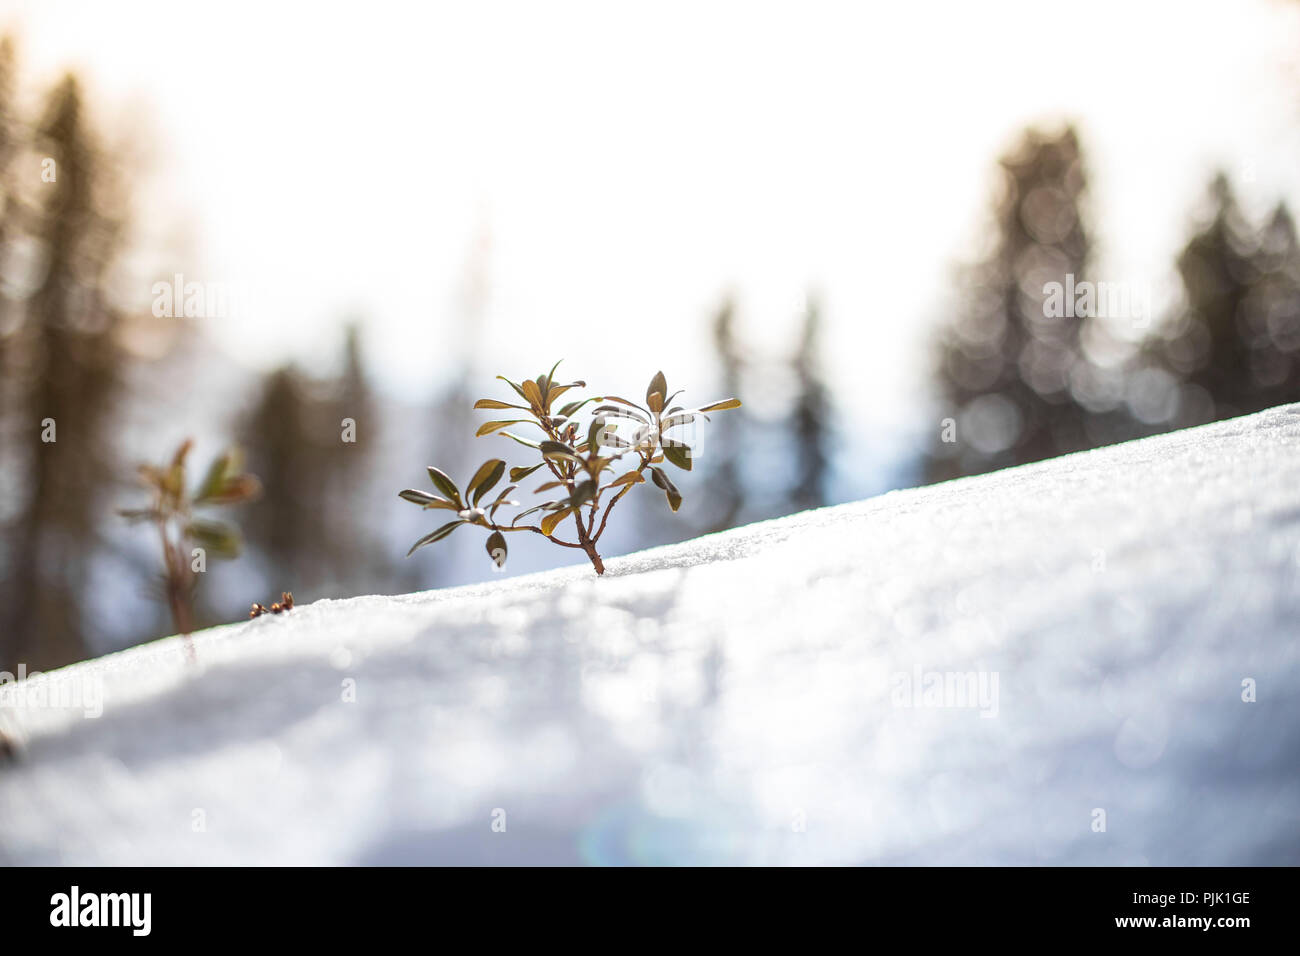 A plant breaks through a closed blanket of snow in the Tyrolean Alps Stock Photo